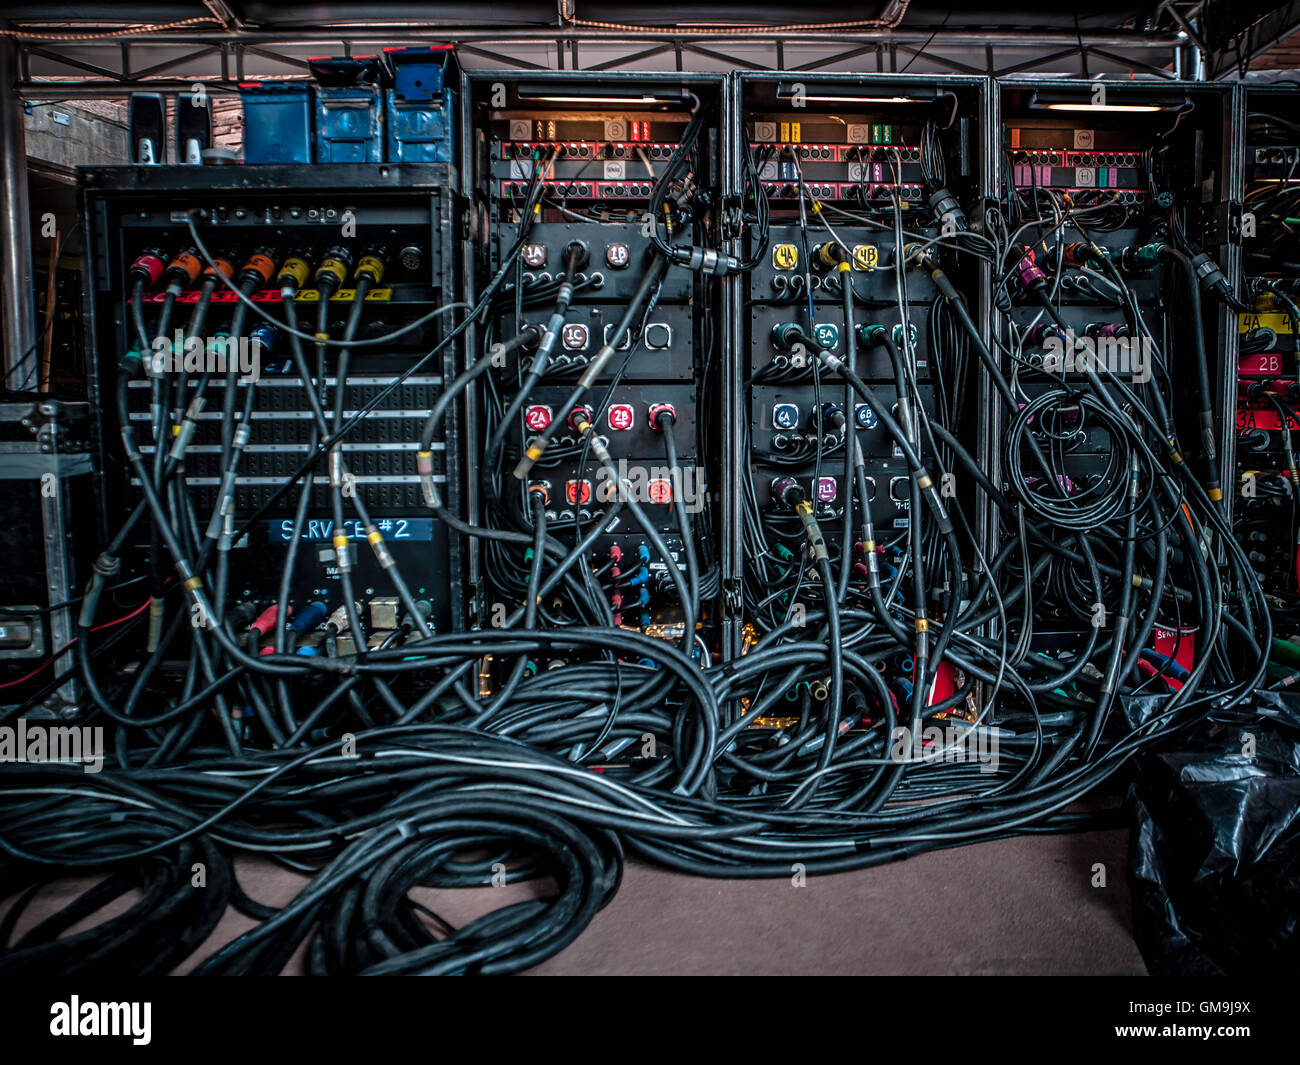 Rear view of amplifiers and cables Stock Photo